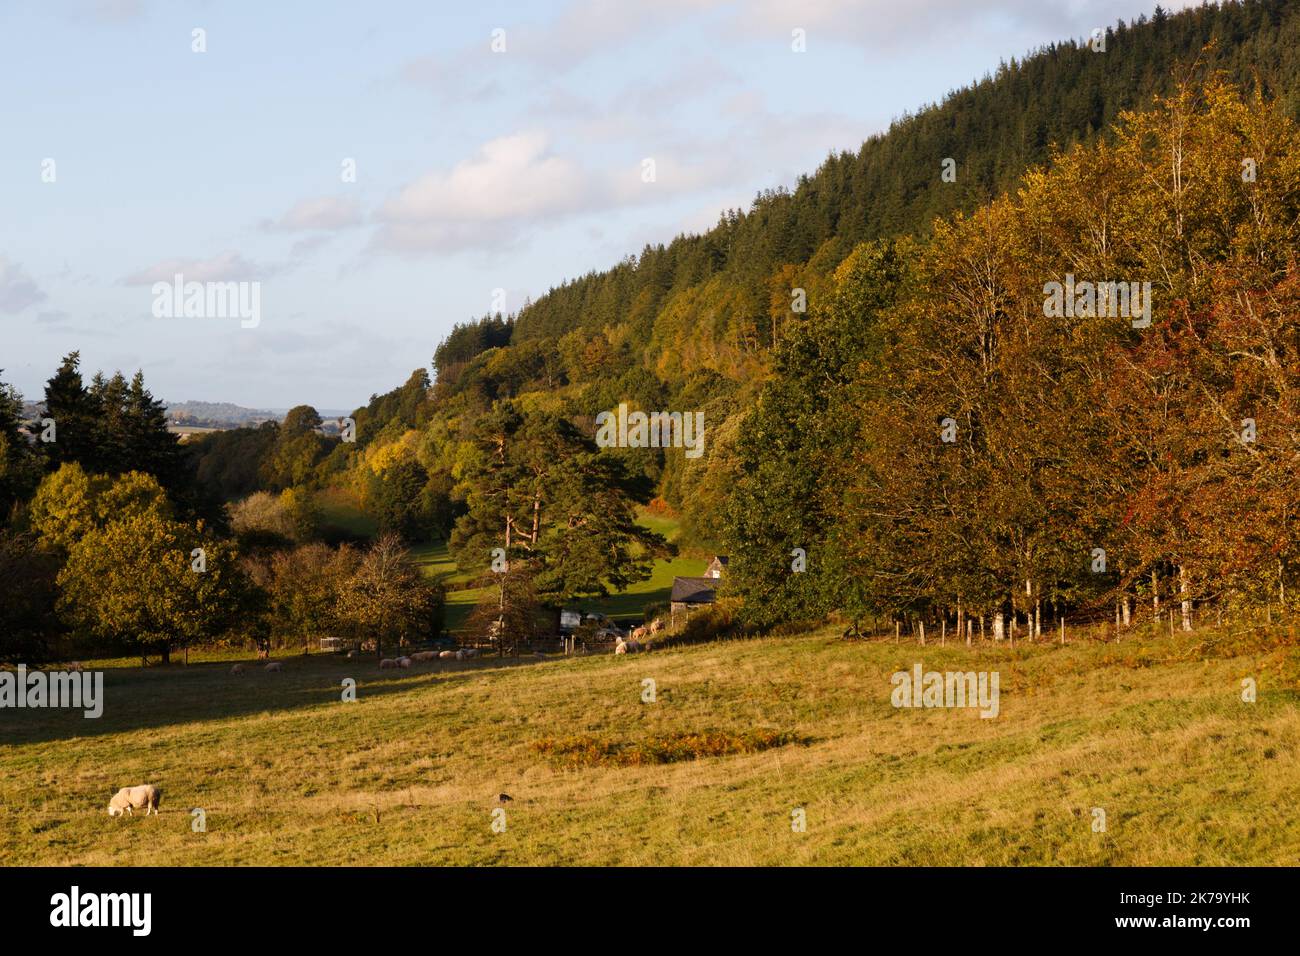 Talybont reservoir, South Wales, UK.  17 October '22.  UK weather: A sunny afternoon at the reservoir.  Credit: Andrew Bartlett/Alamy Live News. Stock Photo